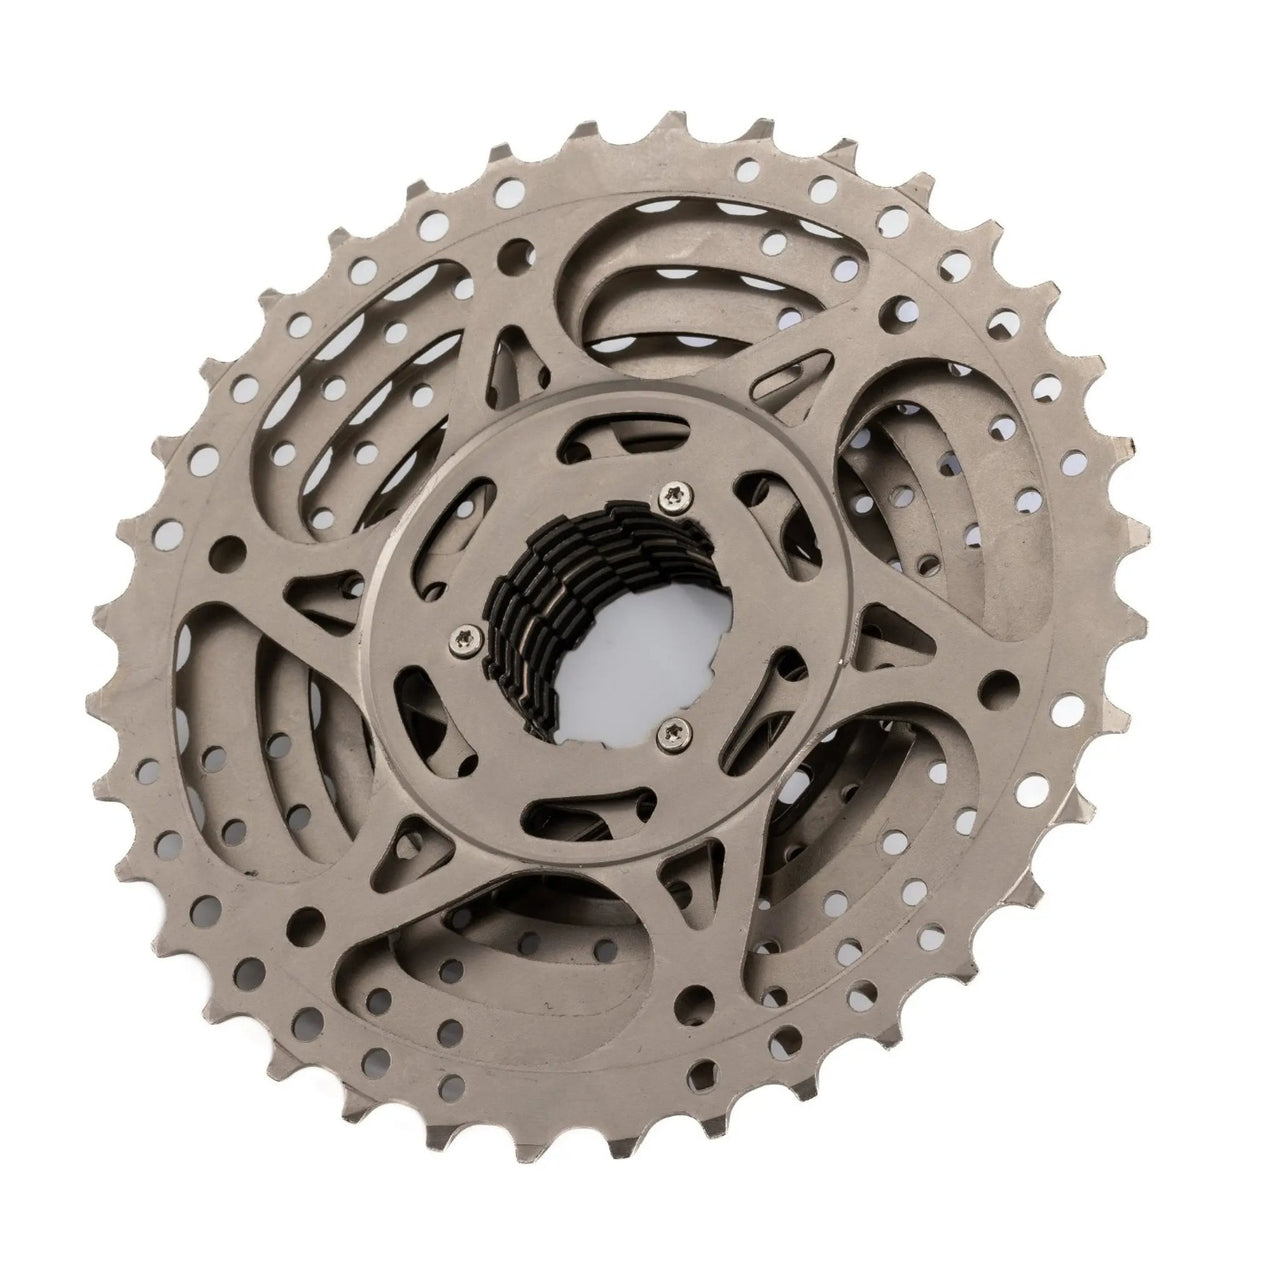 Close-up of AirBike 10 Speed 11-36T Cassette Gears